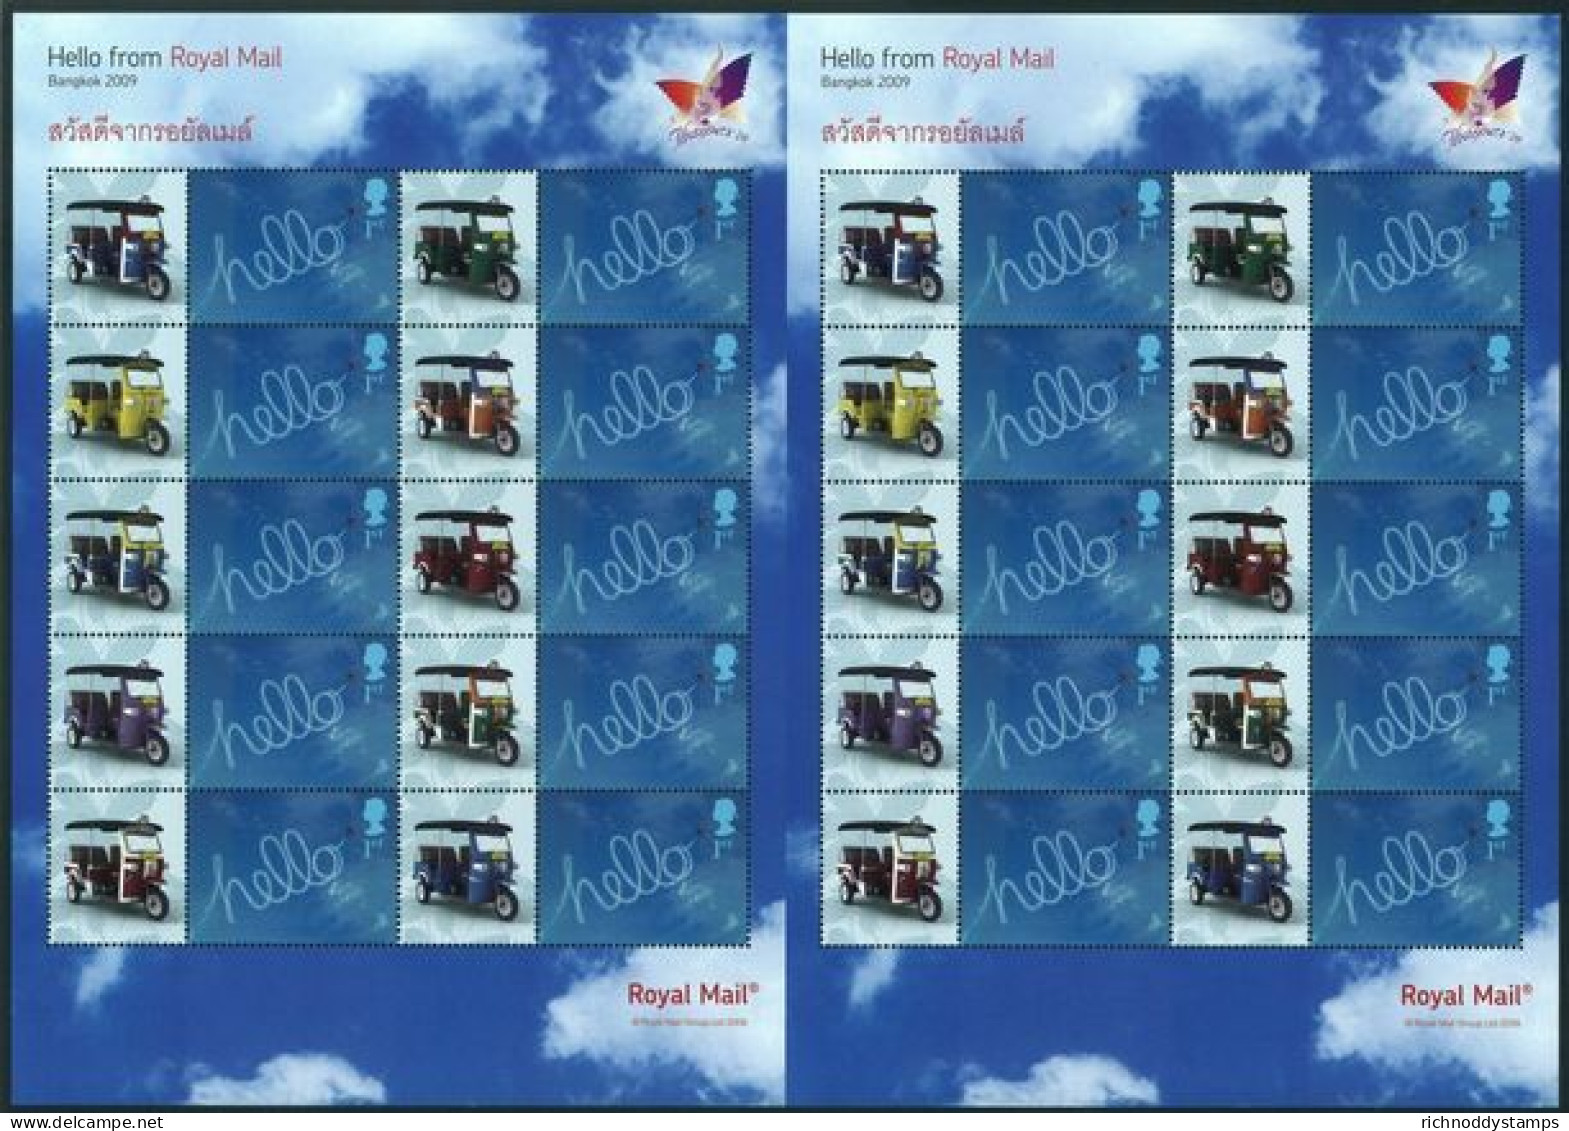 2009 Hello From Royal Mail Bangkok, Thaipex 2009 Smilers Unmounted Mint.  - Francobolli Personalizzati